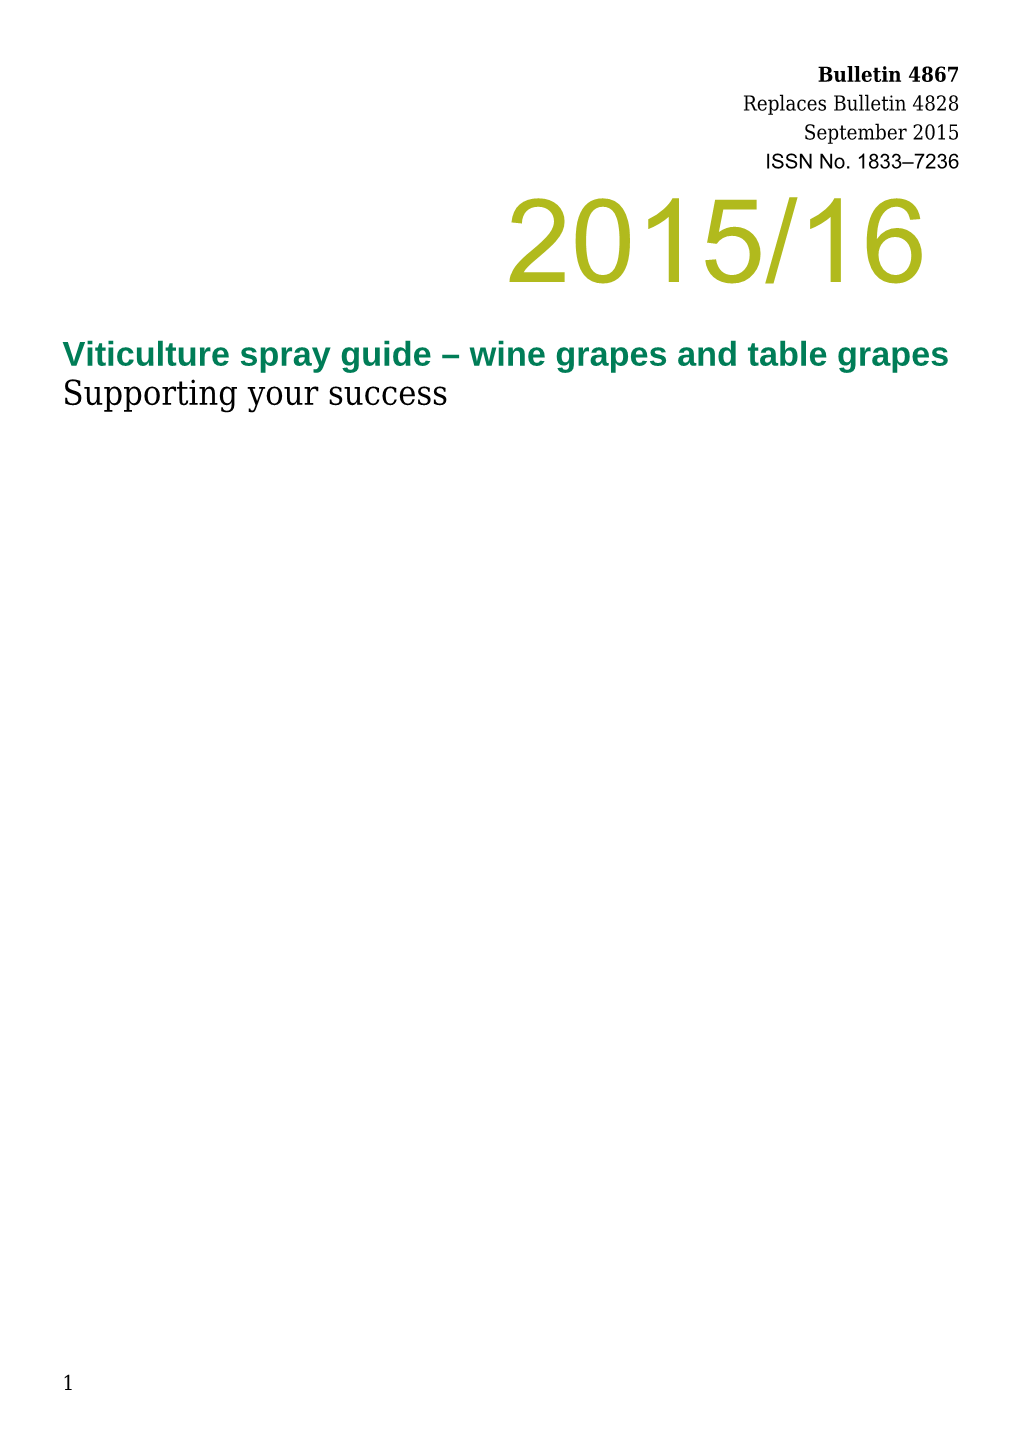 Viticulture Spray Guide Wine Grapes and Table Grapes